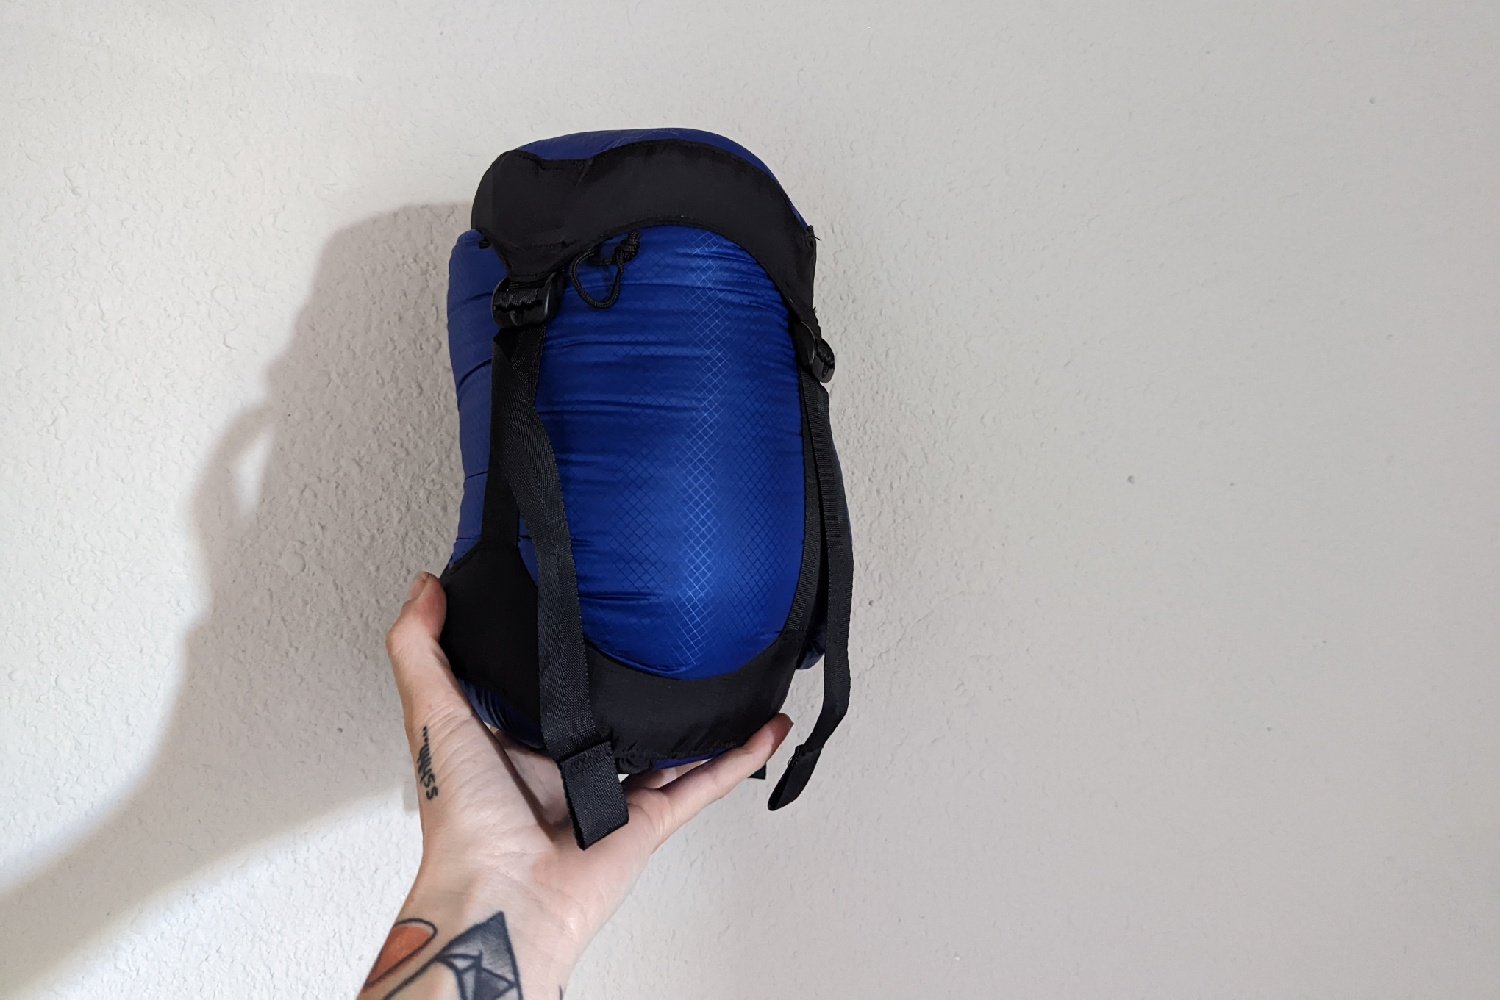 A person holding up a compression sack with the Zpacks Classic Sleeping Bag inside in front of a white background